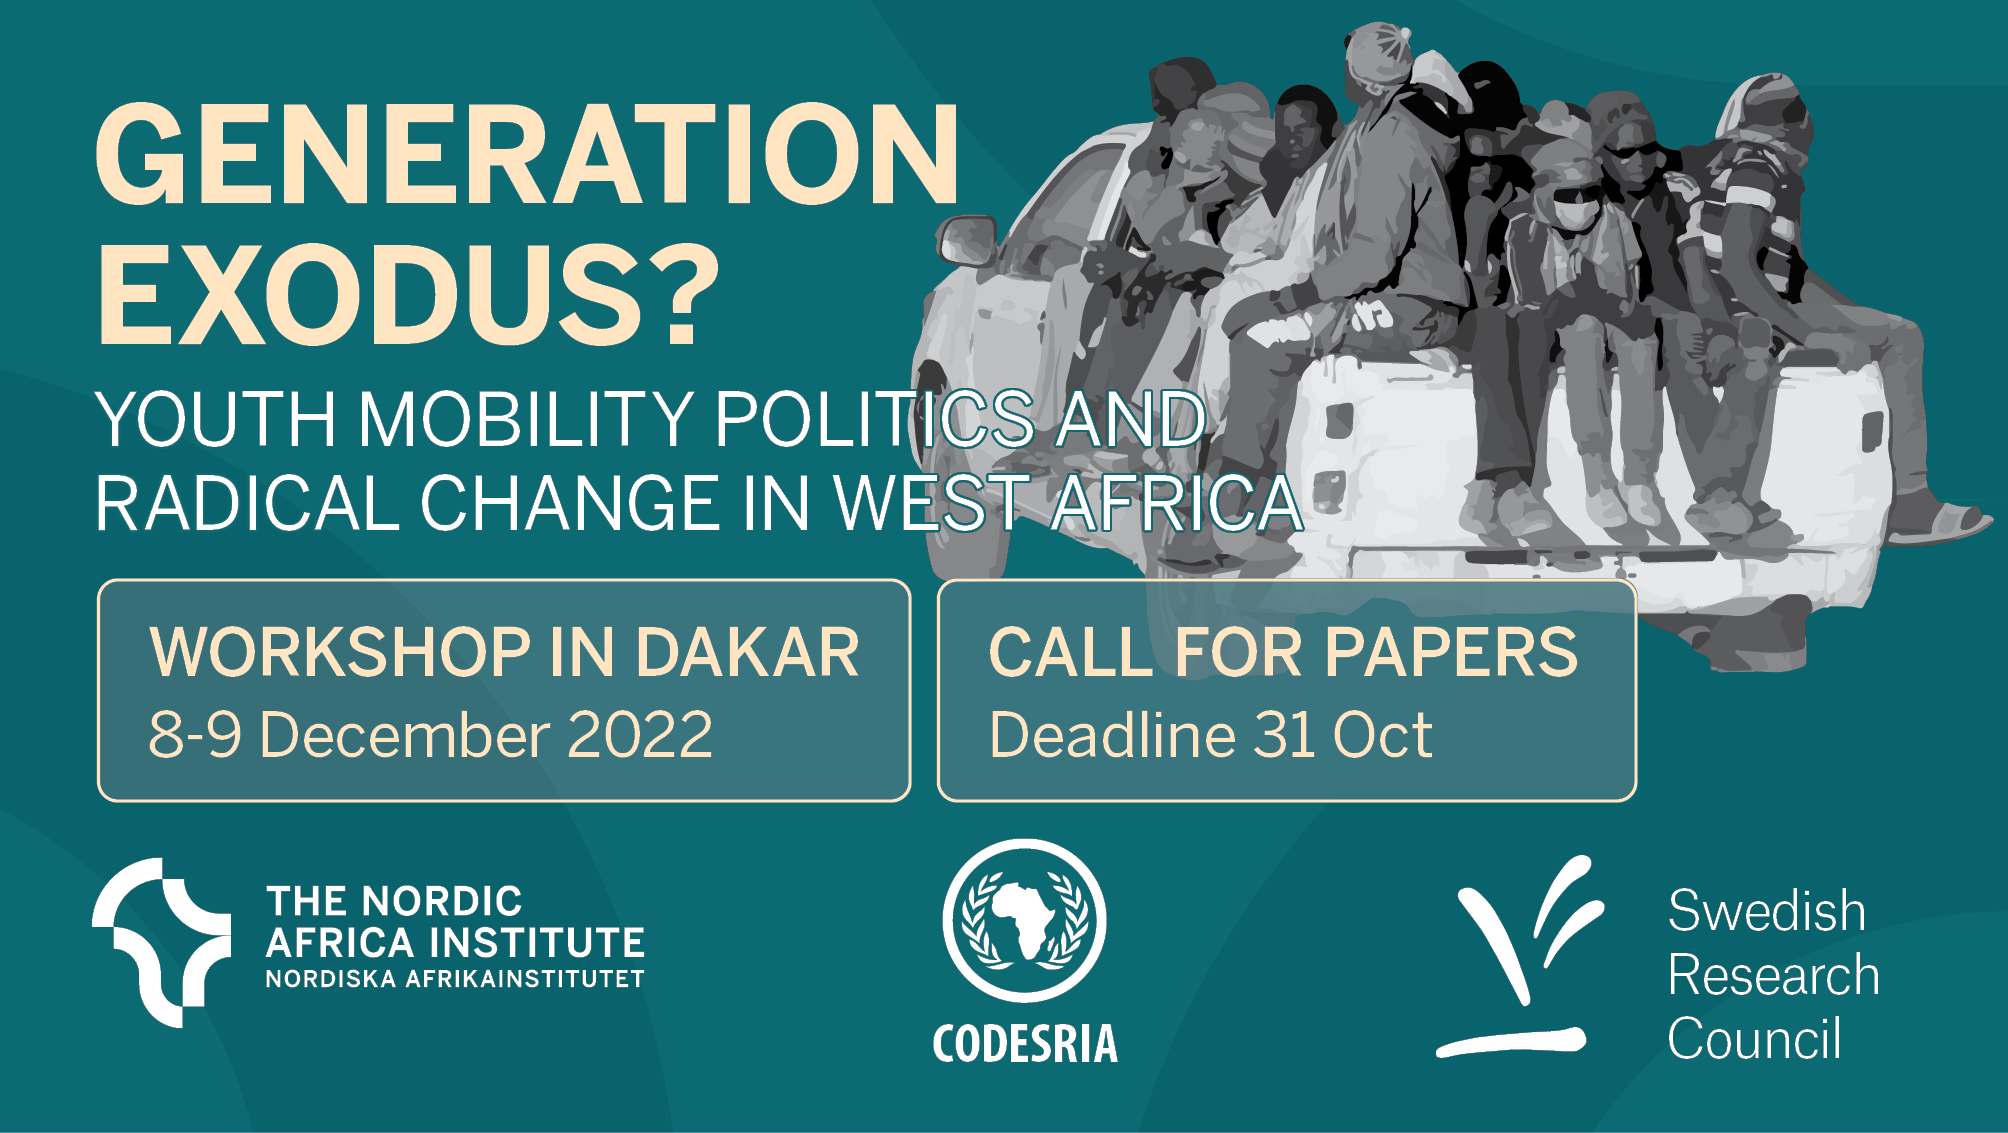 Call for papers workshop Dakar